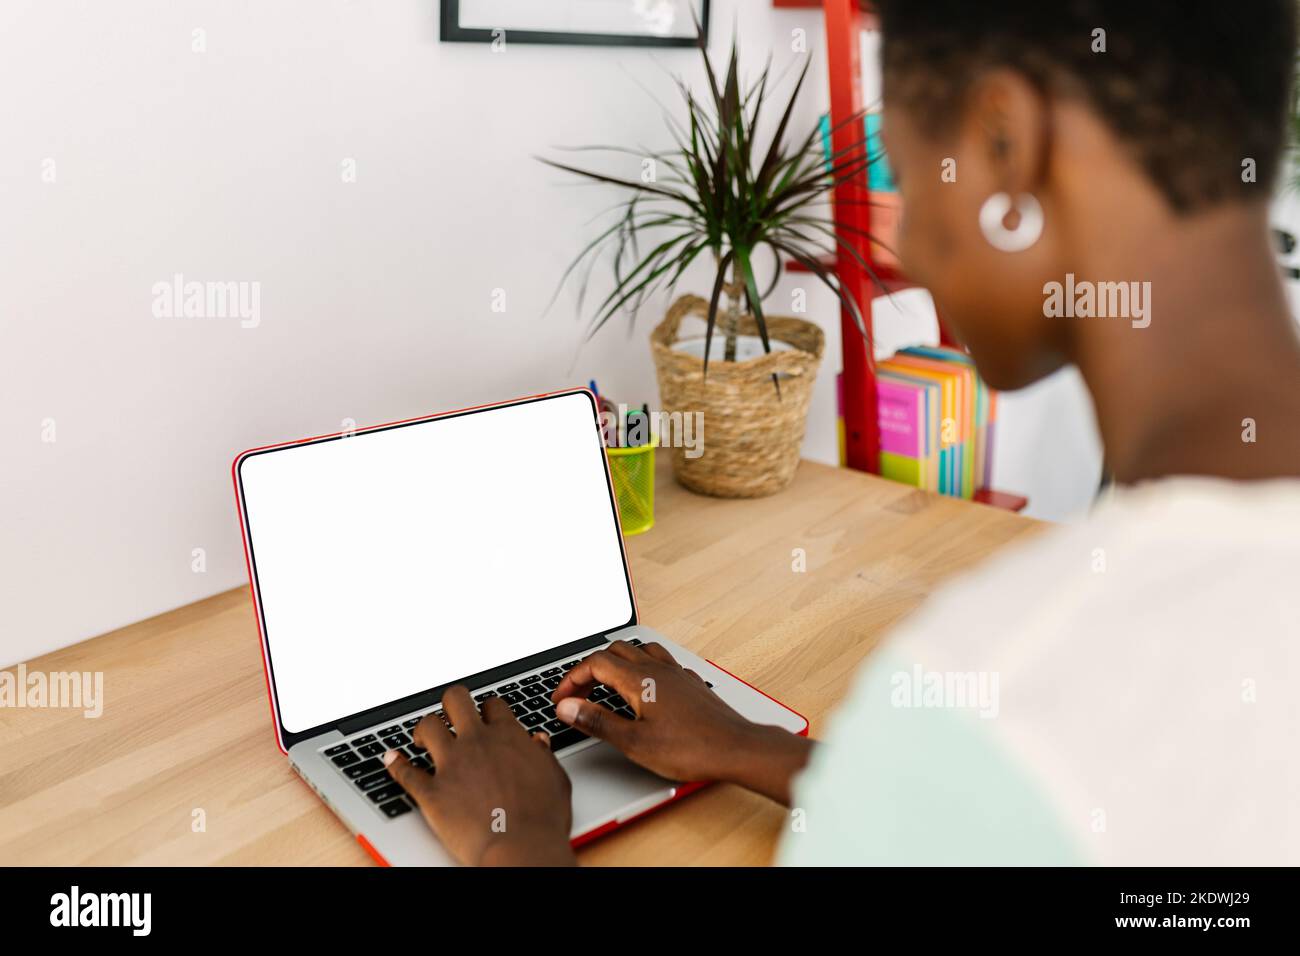 Mockup image of young african woman using laptop computer with blank screen Stock Photo